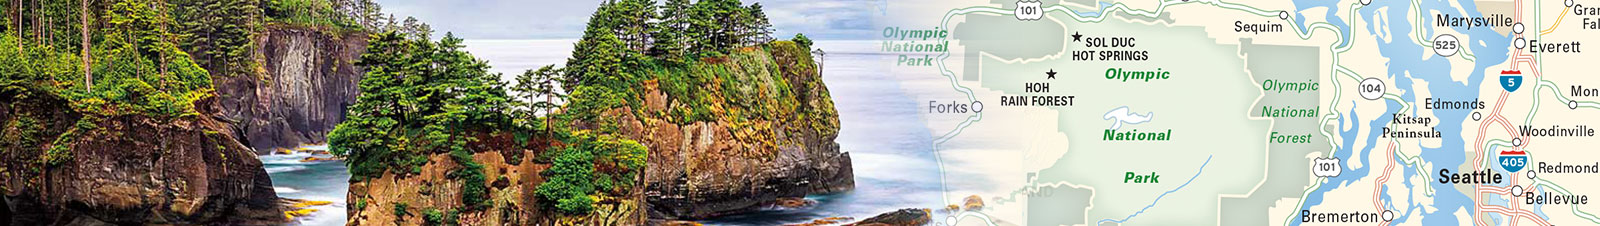 Printable travel map header featuring photo of PNW coastline collaged with a travel map